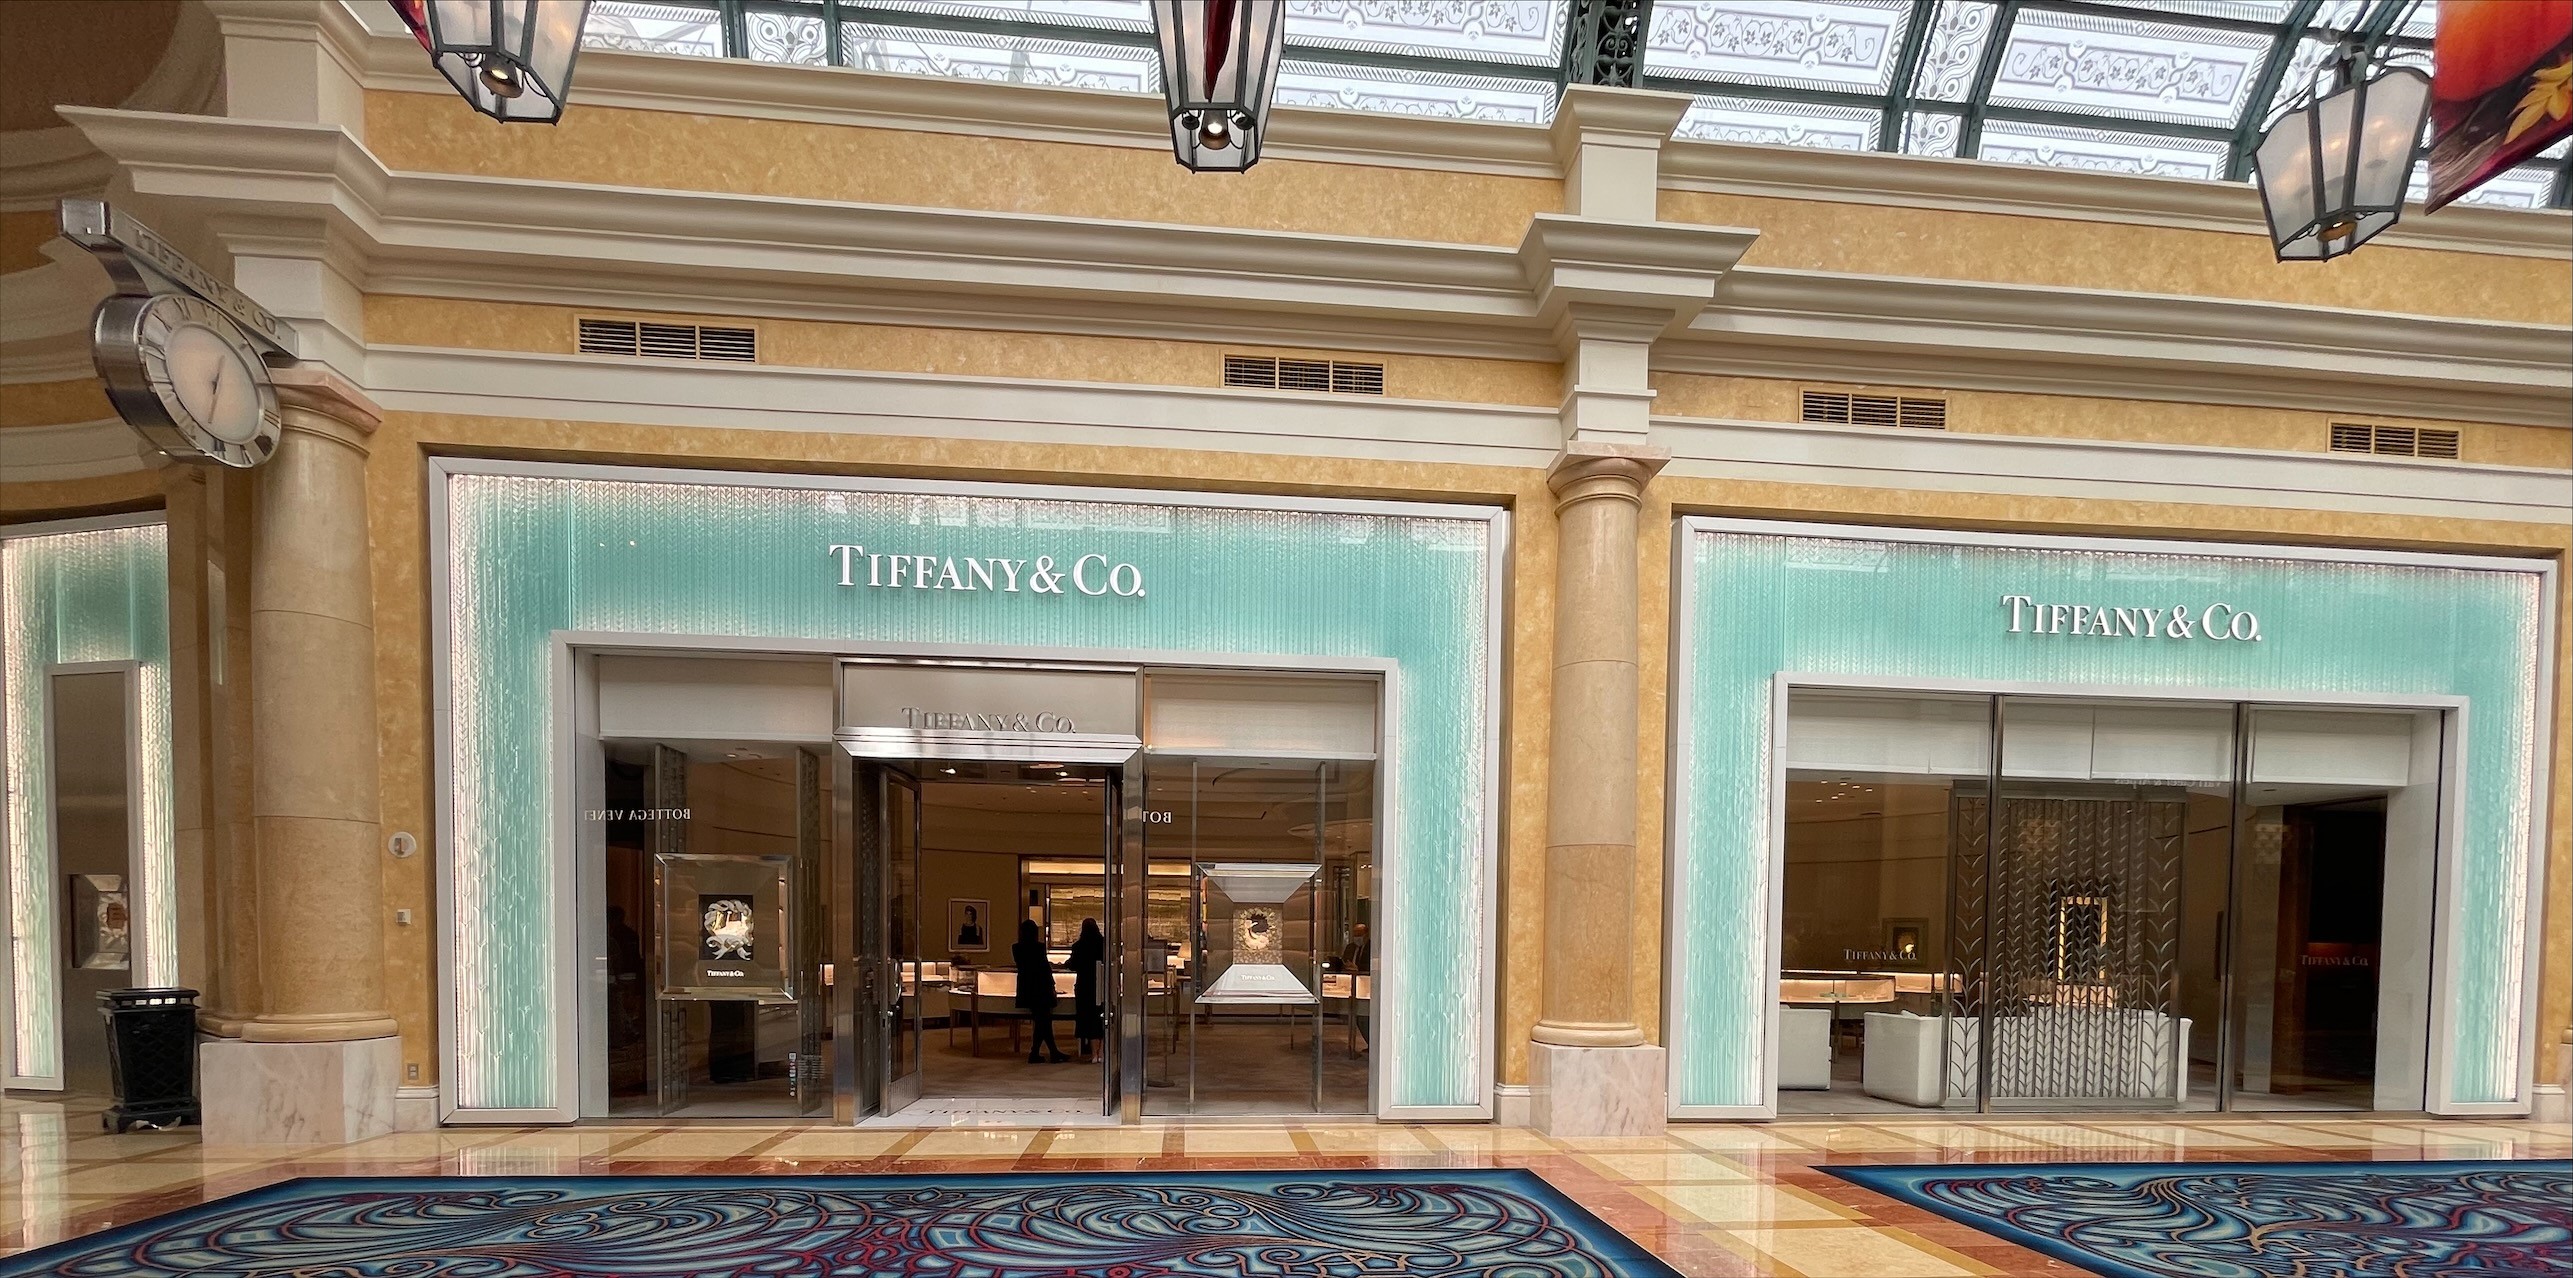 Las Vegas - Circa December 2016: Tiffany & Co. Retail Mall Location.  Tiffany's is a Luxury Jewelry and Specialty Retailer, Headquartered in New  York City IV – Stock Editorial Photo © jetcityimage2 #134569154